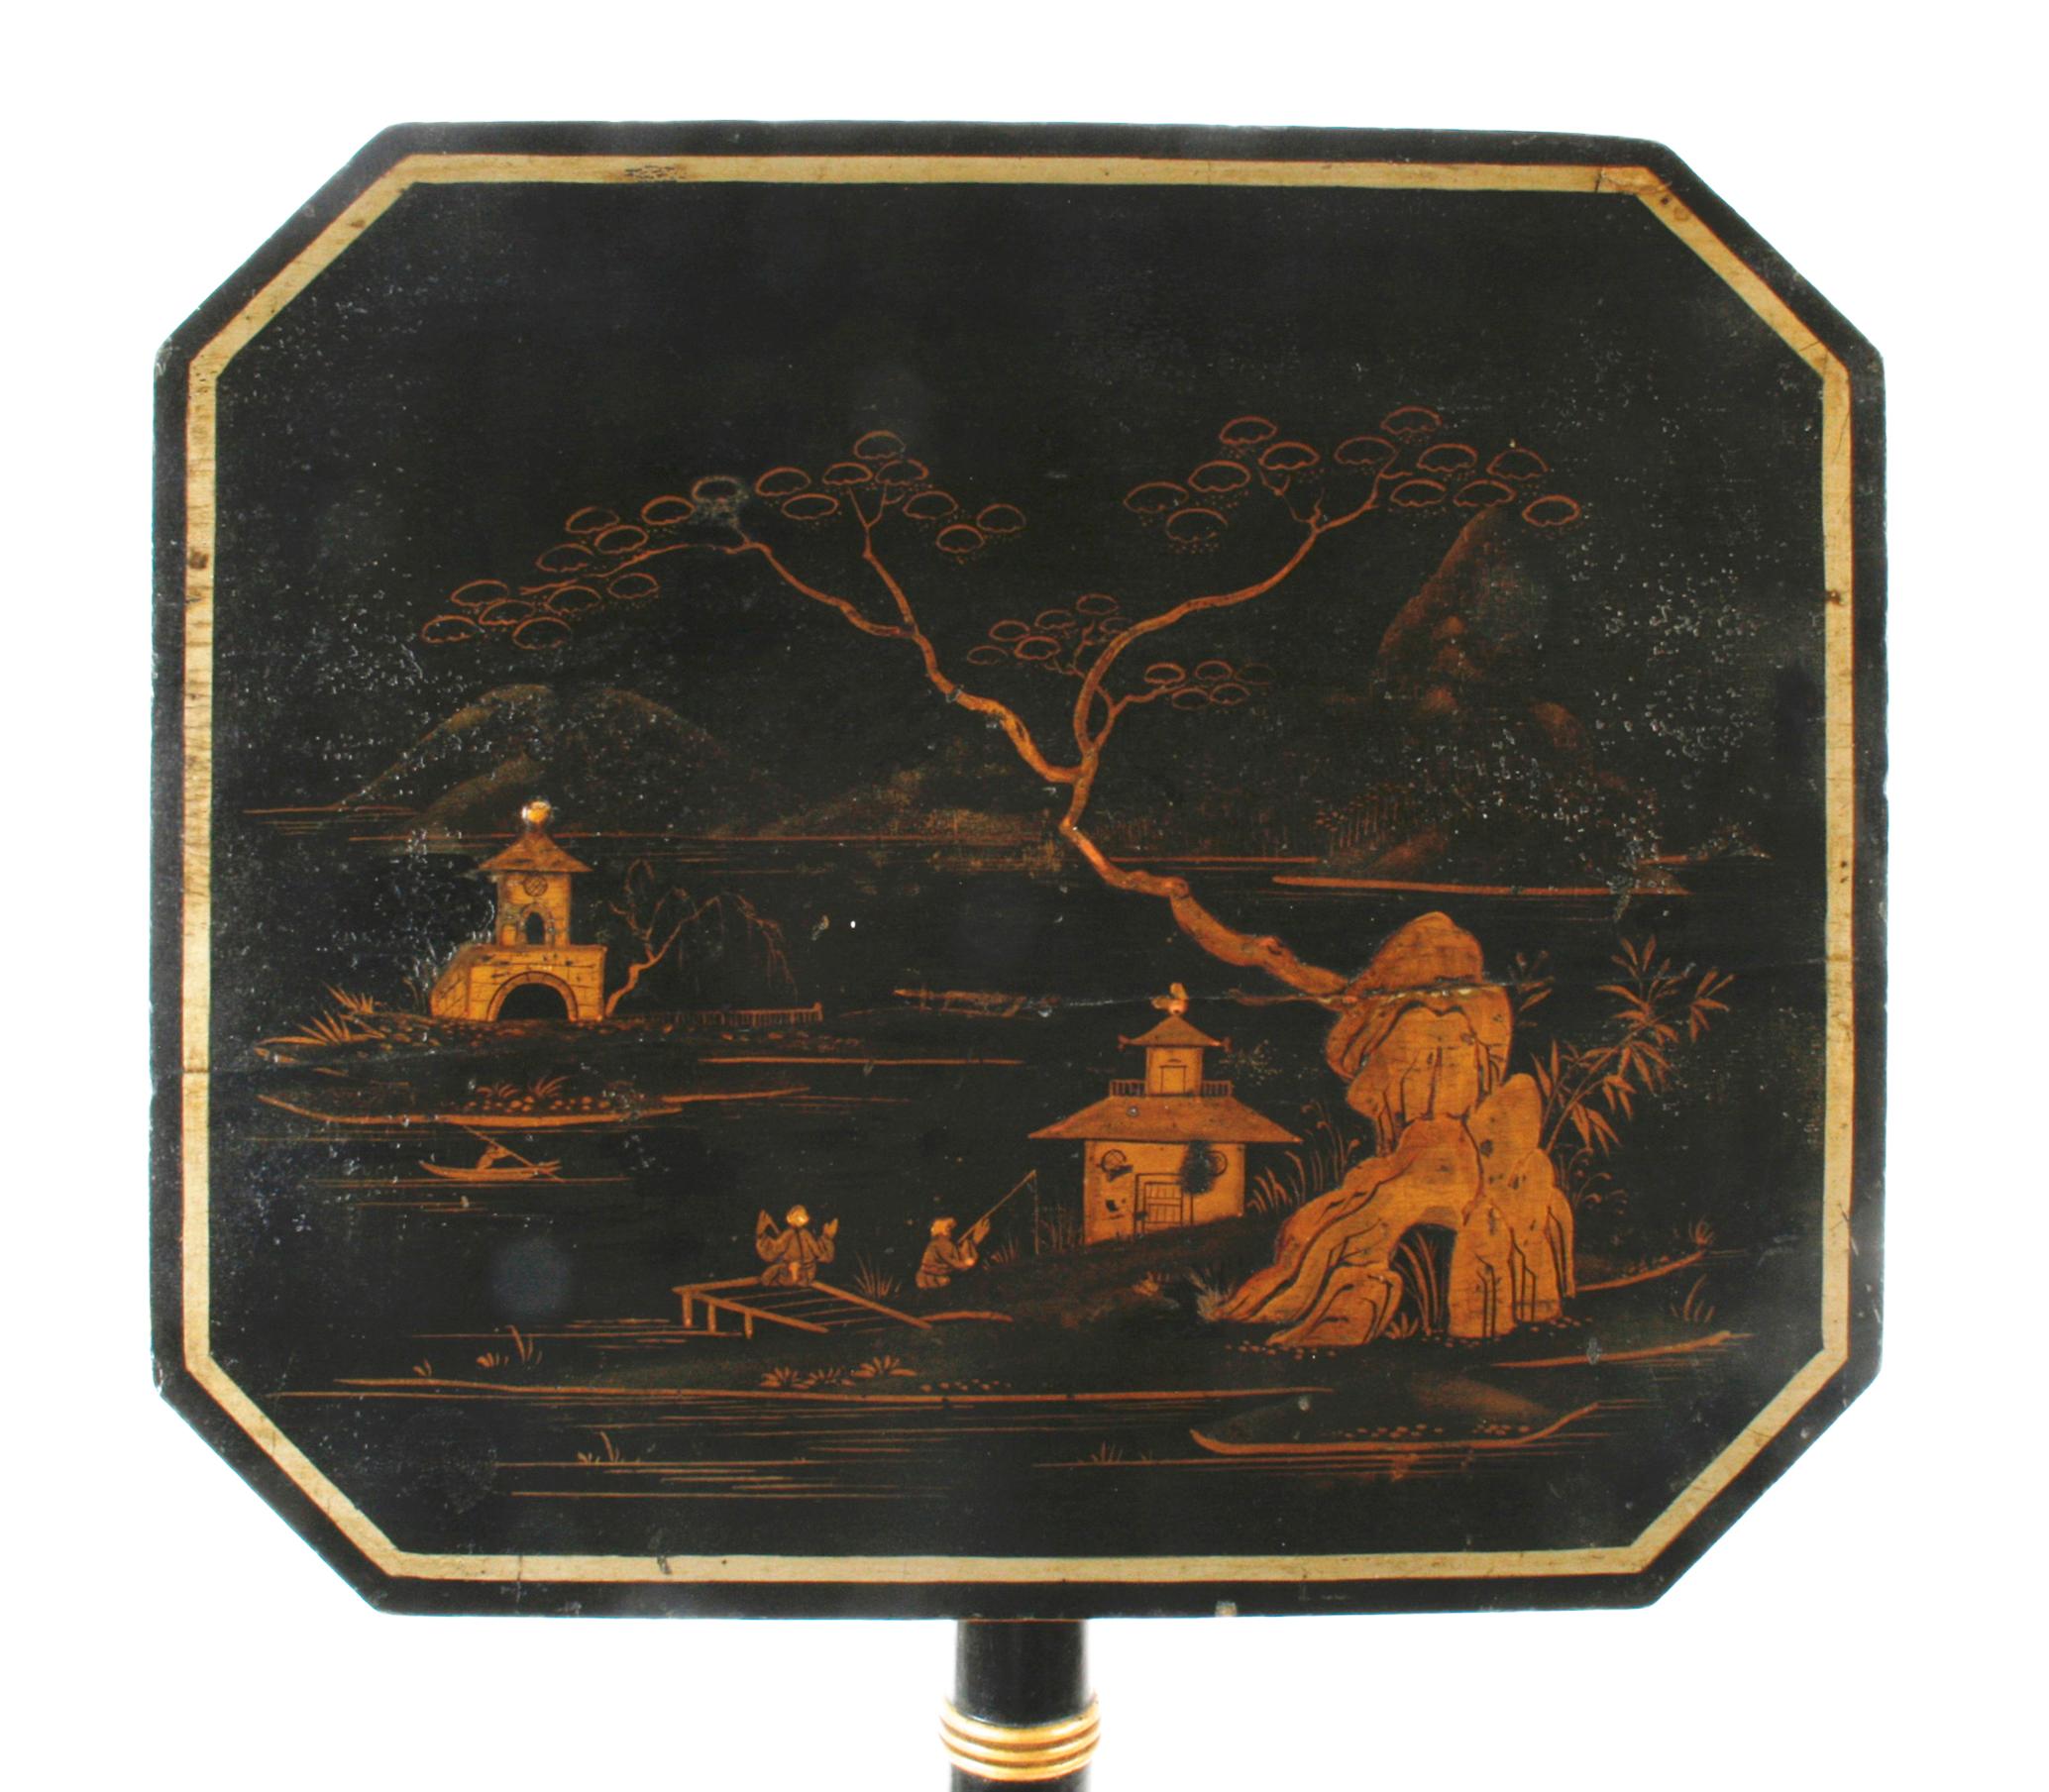 Regency Chinoiserie and parcel-gilt decorated telescoping tilt-top table. The gilt banded tabletop is decorated with an Asian country lake scene with pagodas and fishermen. The turned pedestal is also gilt decorated with cabriolet tripod legs ending